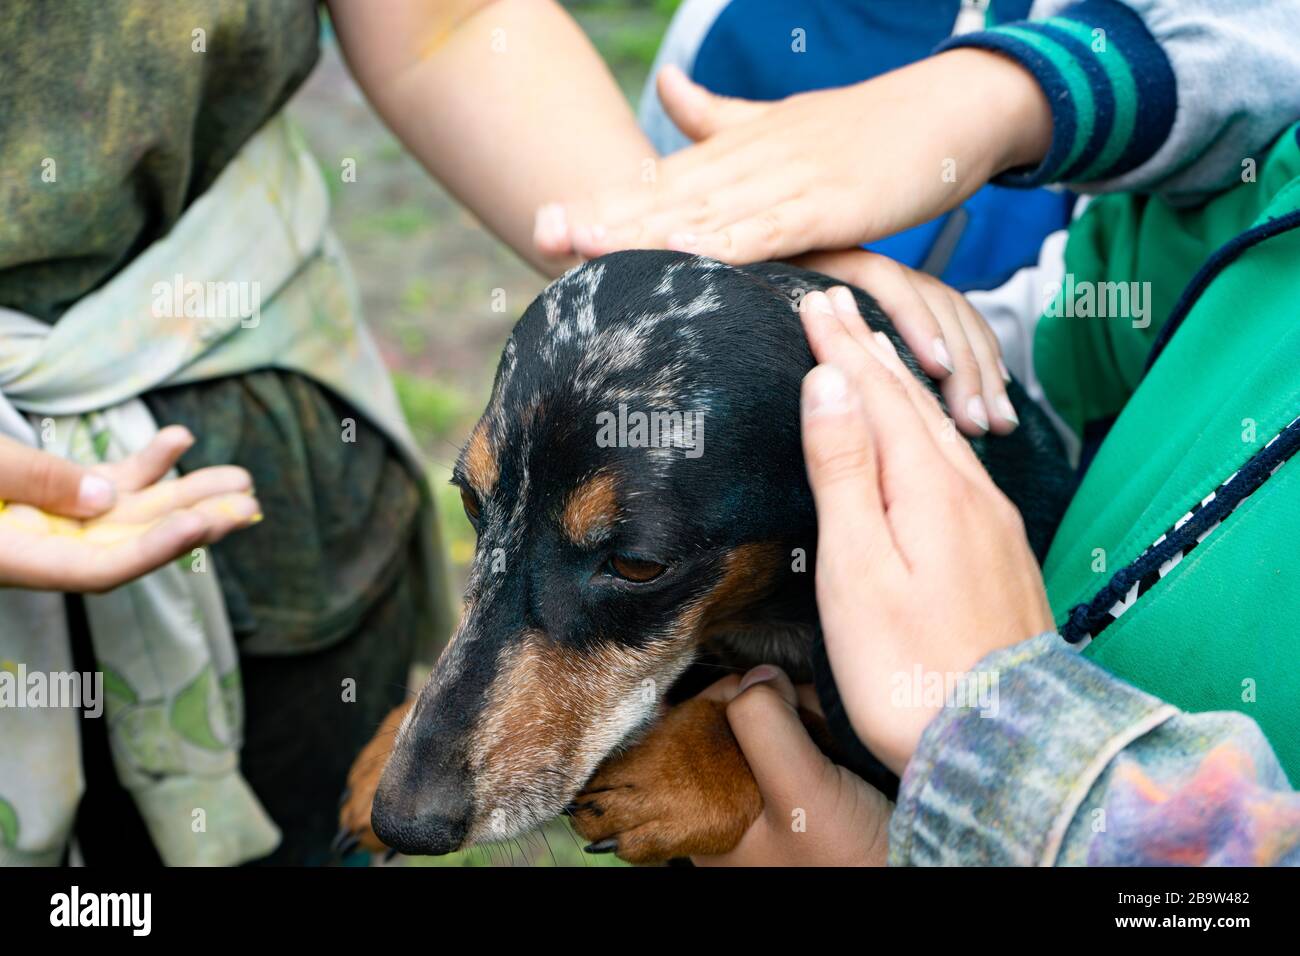 Chelyabinsk Region, Russia - JULY 2019. At the festival of colors, children caress the dog with their hands. The dog's head is smeared with paint Stock Photo